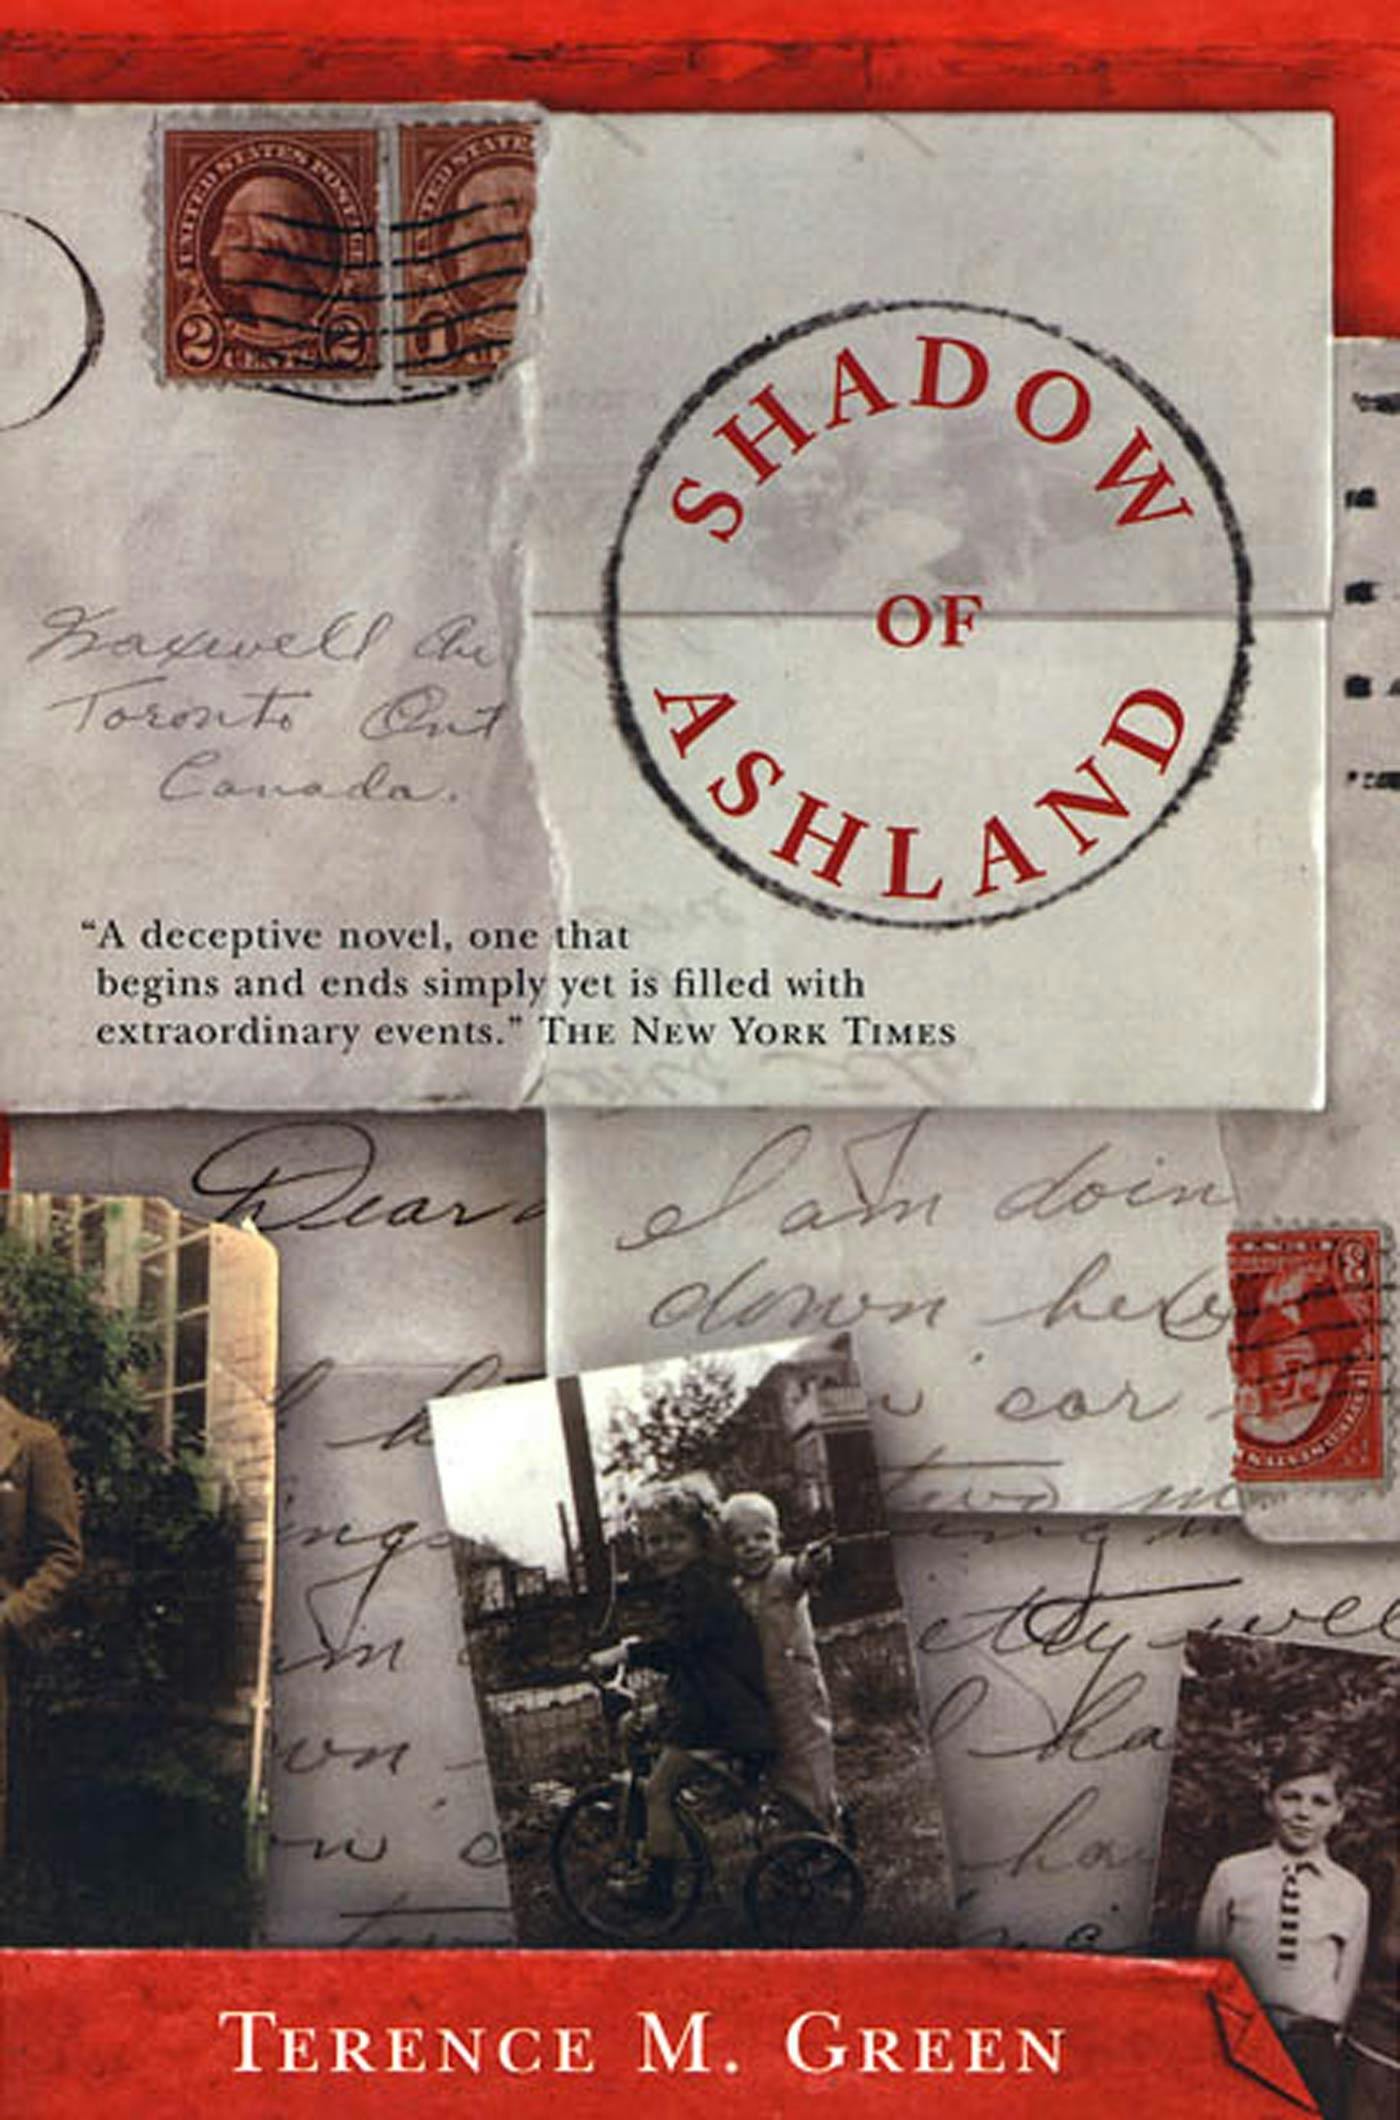 Cover for the book titled as: Shadow of Ashland